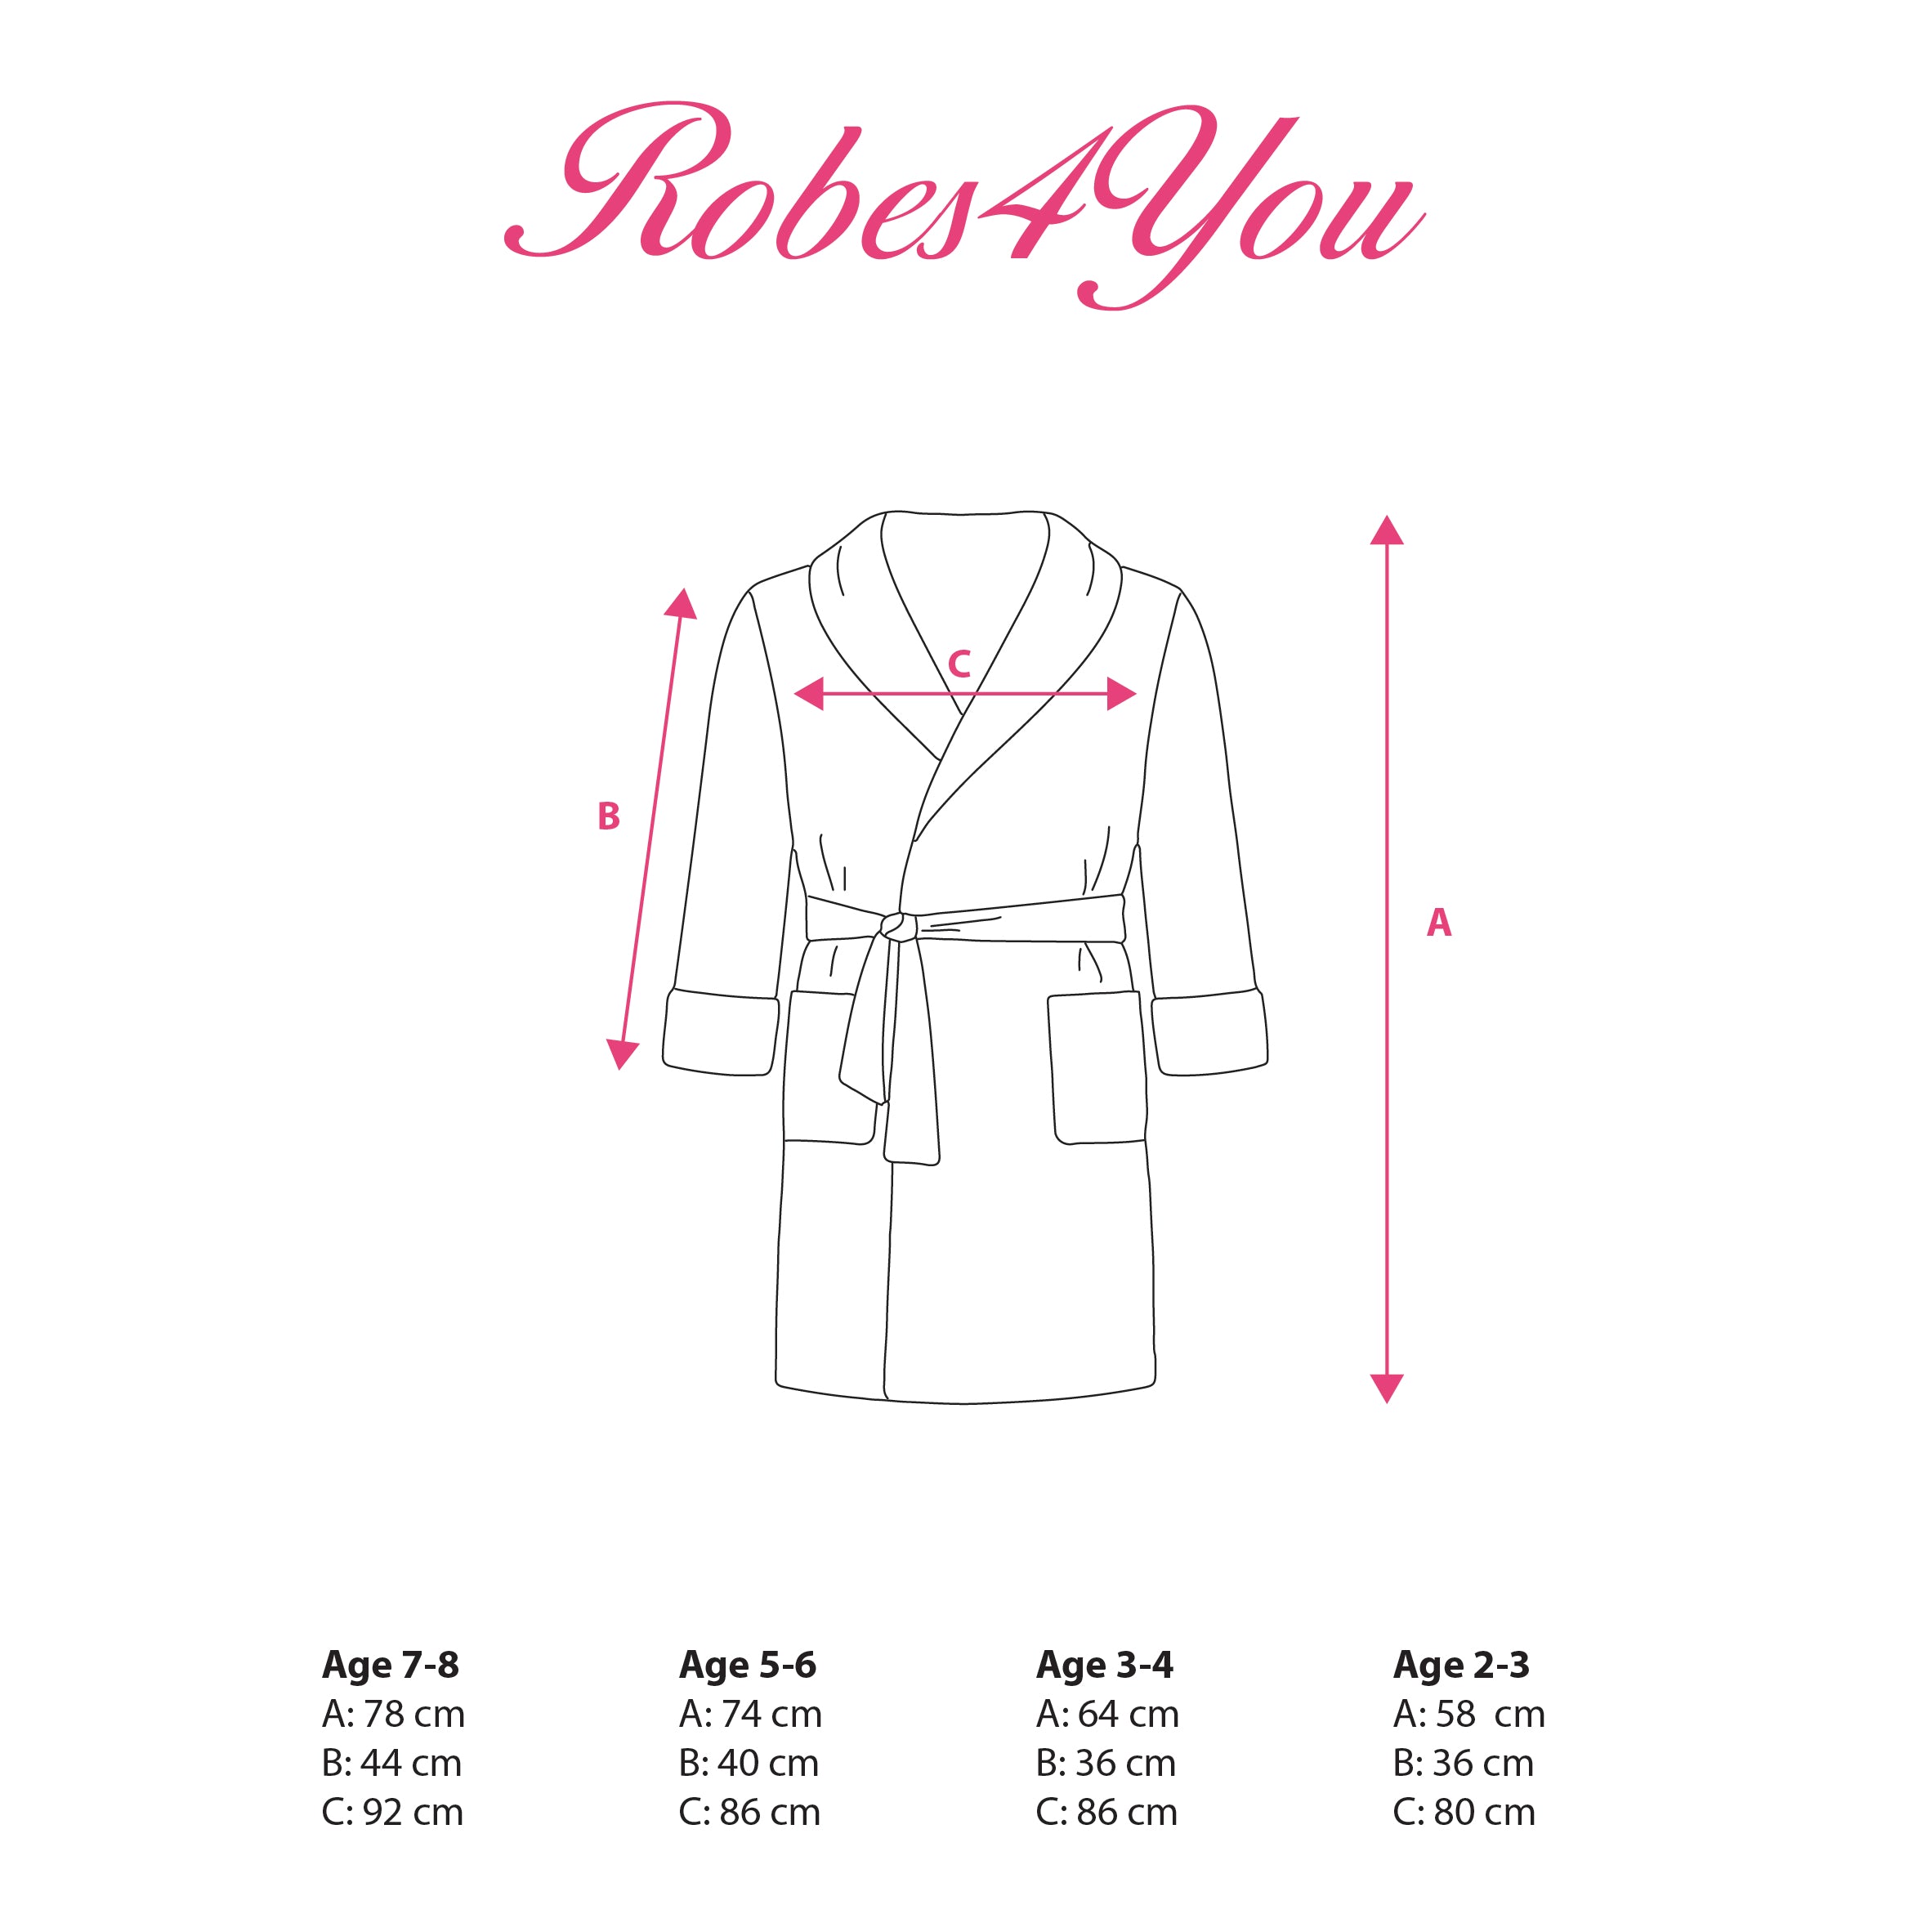 Children's robes measurements -robes4you